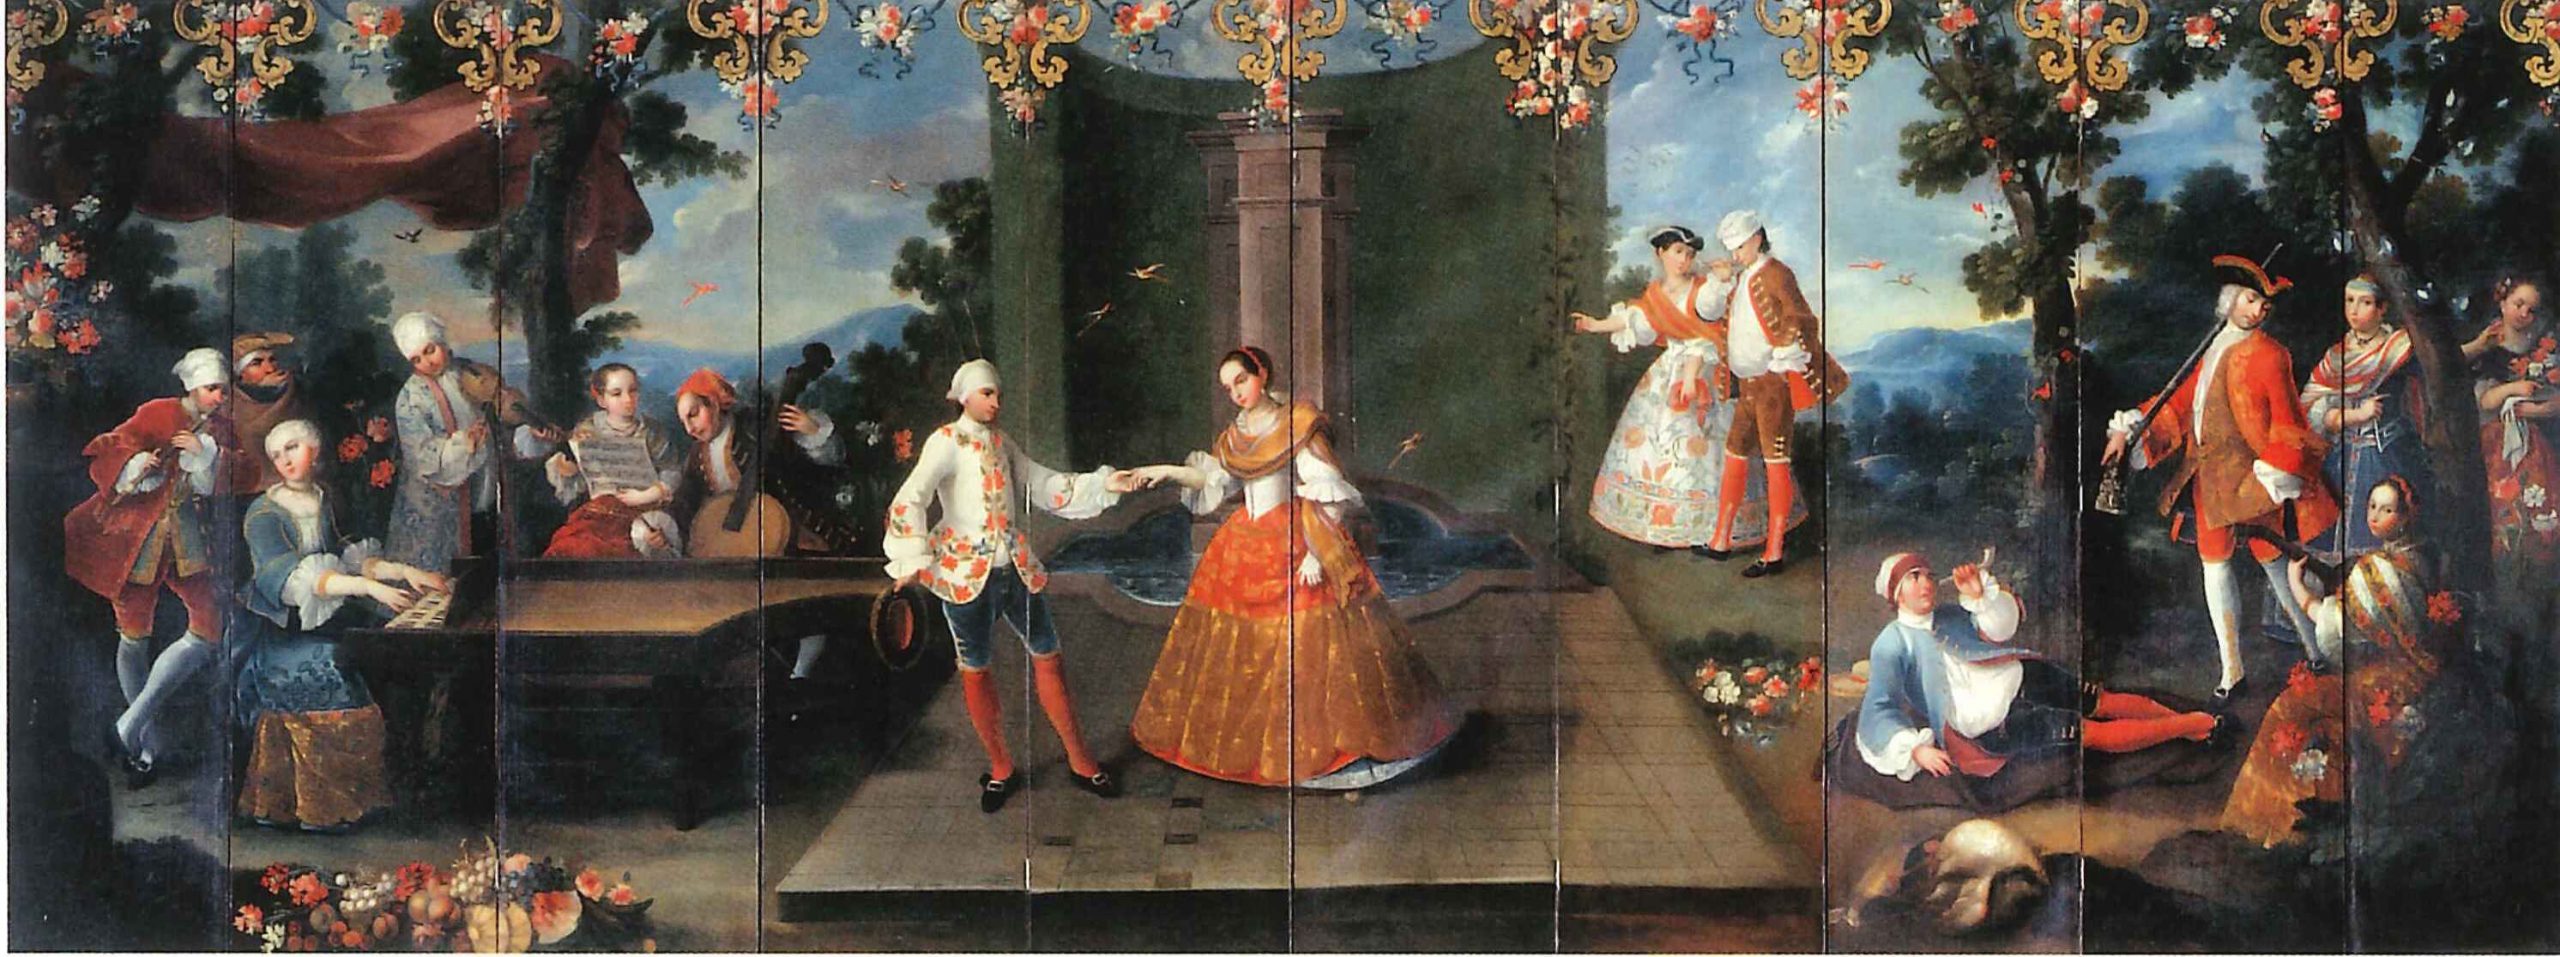 Painted on a screen: Well-to-do party-goers watch a dancing couple on a small stage